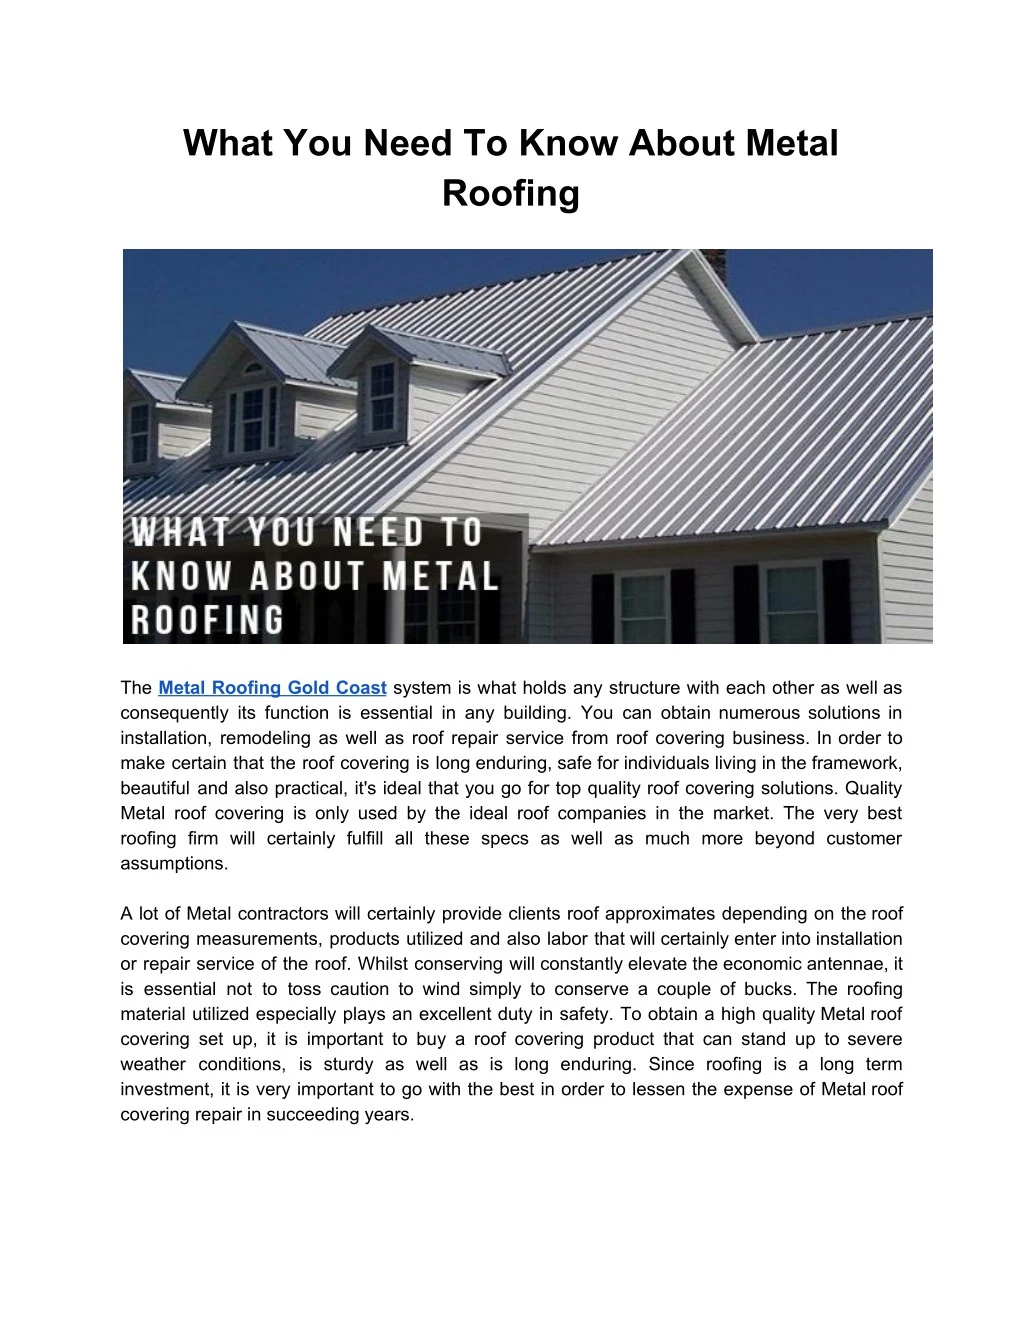 what you need to know about metal roofing